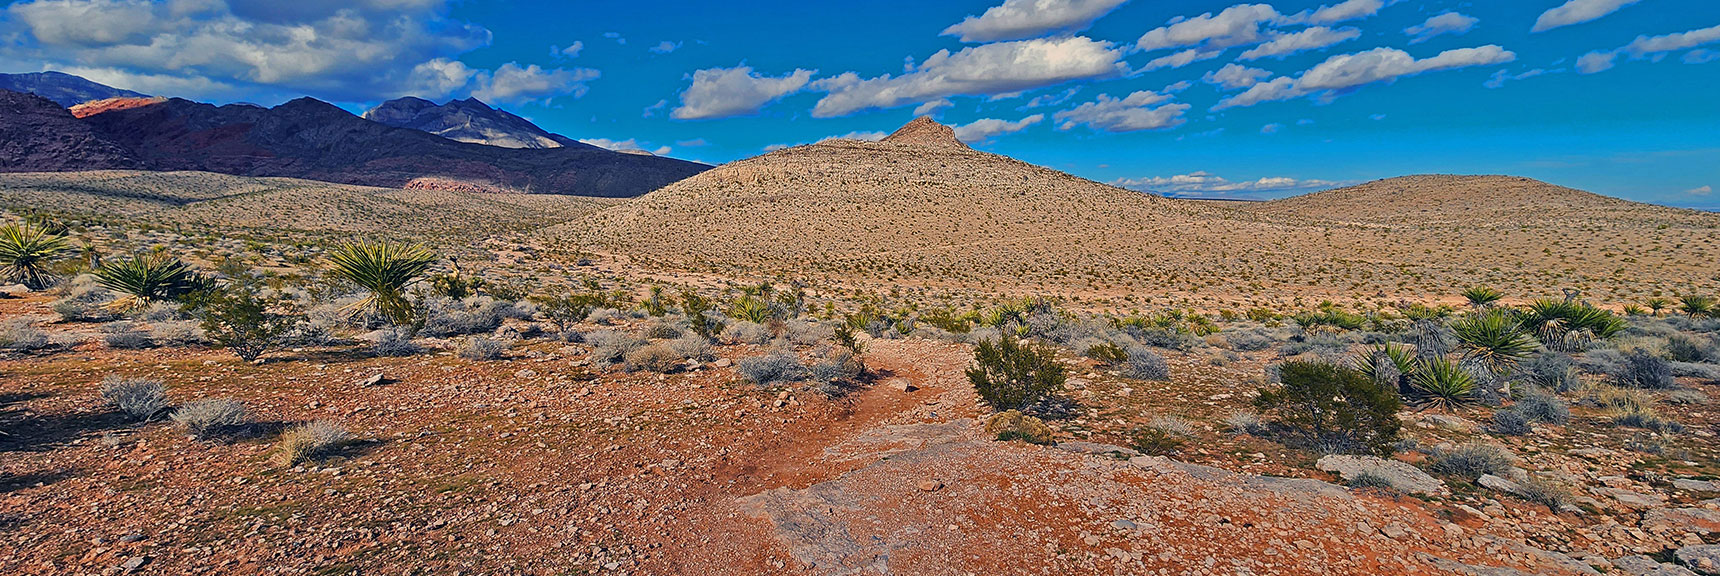 View Back to Peak 3844 and Half Wilson Trail While Approaching Gene's Trailhead | Calico Basin Daily Workout Trails | Calico Basin, Nevada